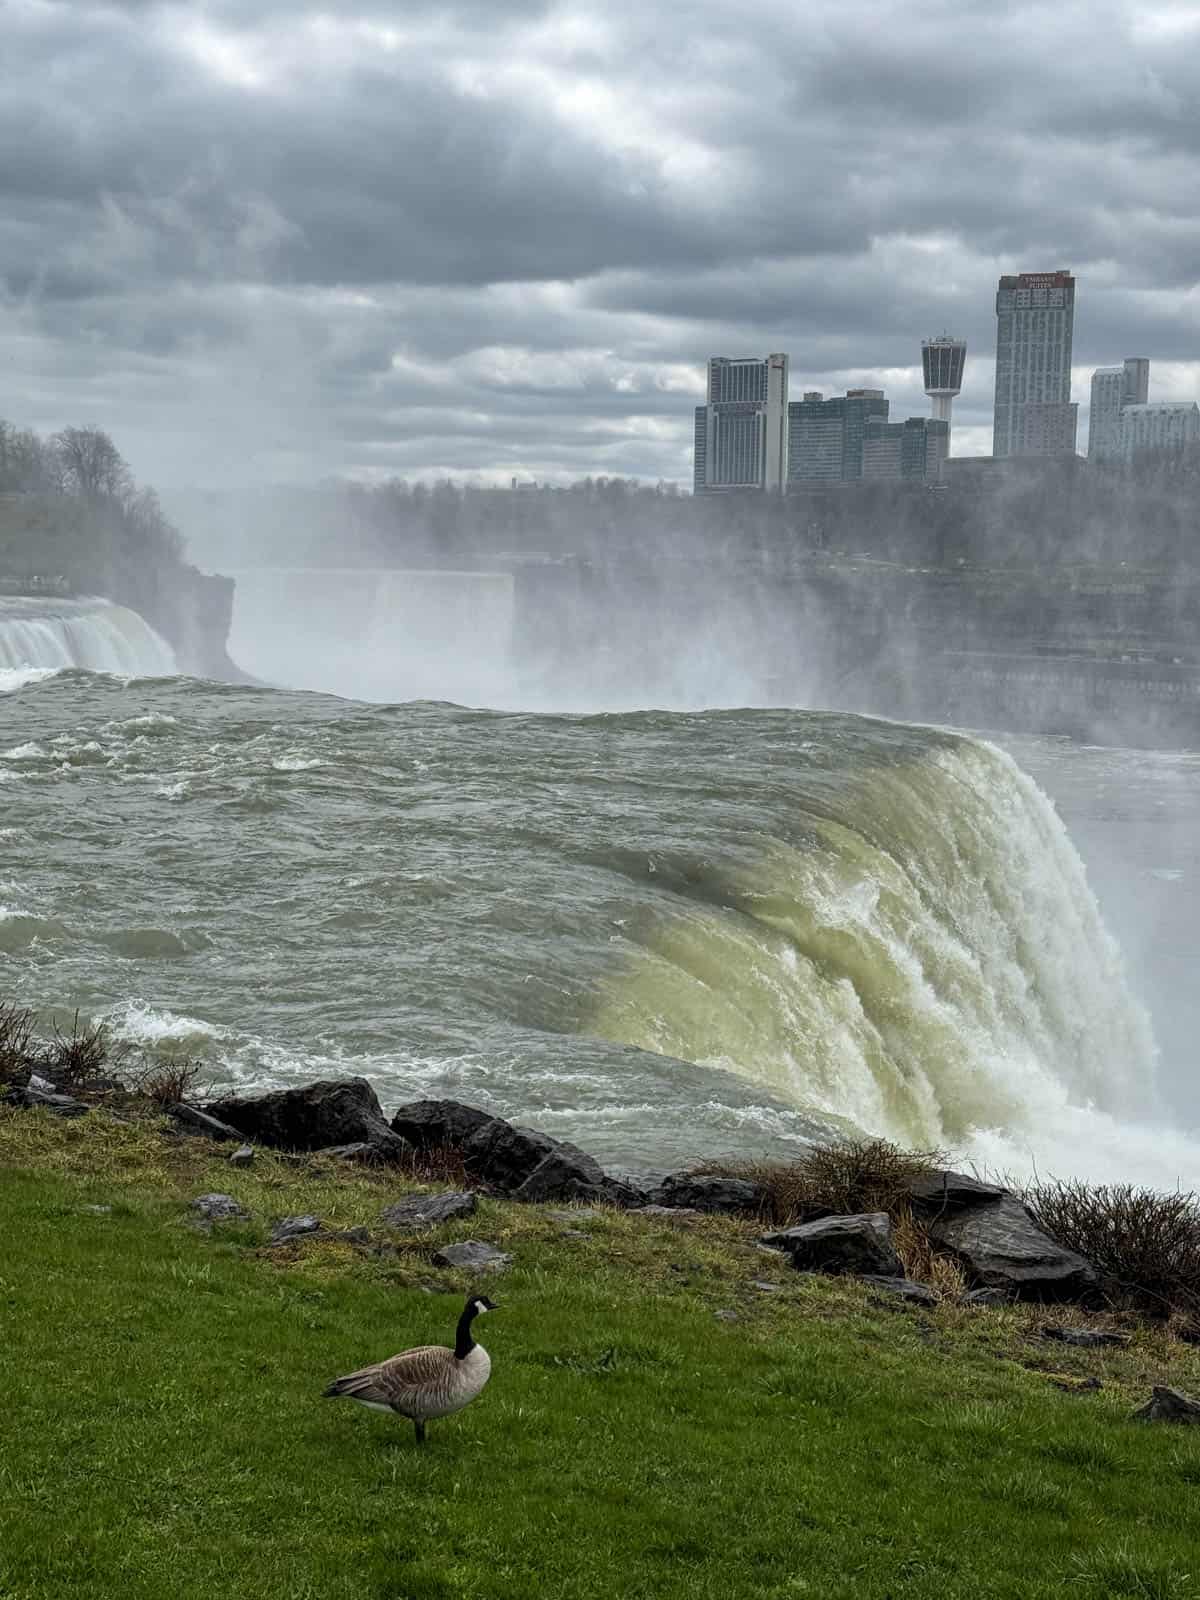 An image of a goose on the grass in front of American Falls at Niagara Falls with Canada in the background.